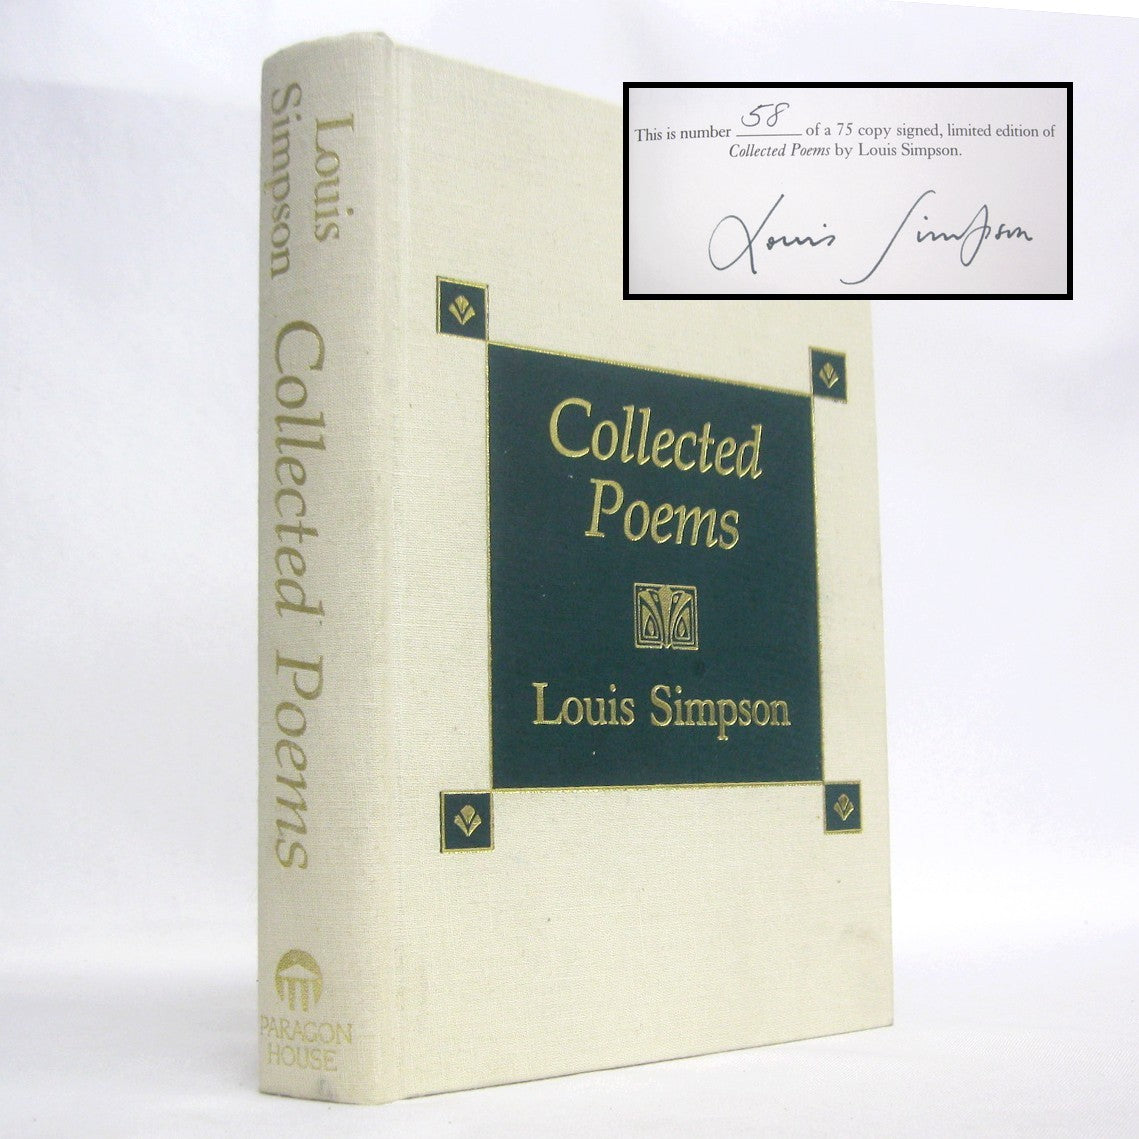 Collected Poems by Louis Simpson